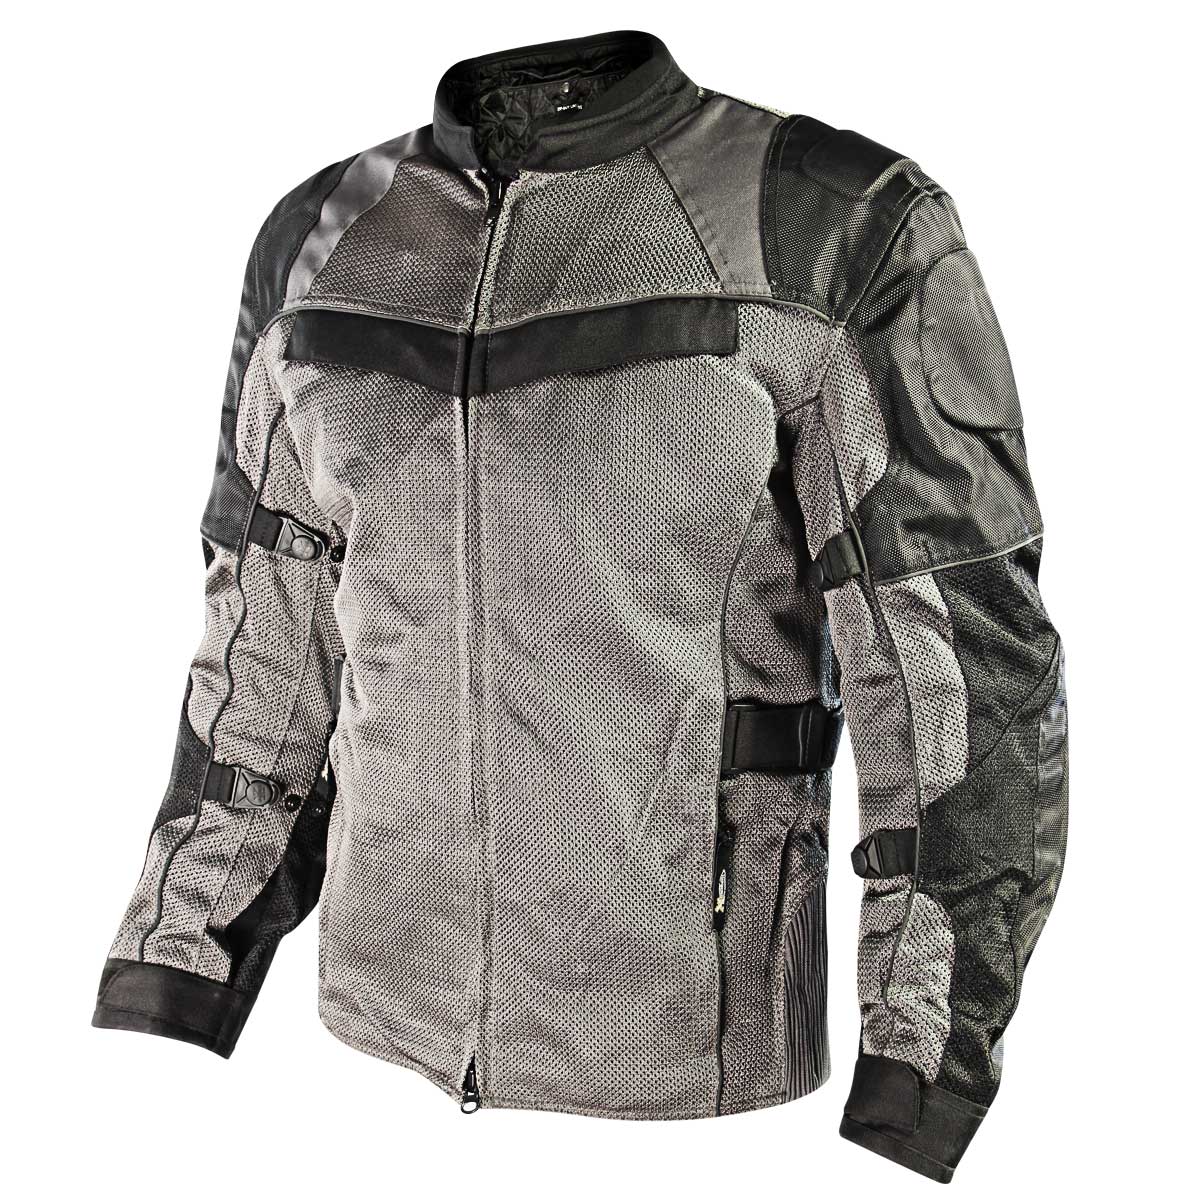 Xelement XS8162 Men's 'Venture' All Season Black with Grey Tri-Tex and Mesh Motorcycle Jacket with X-Armor